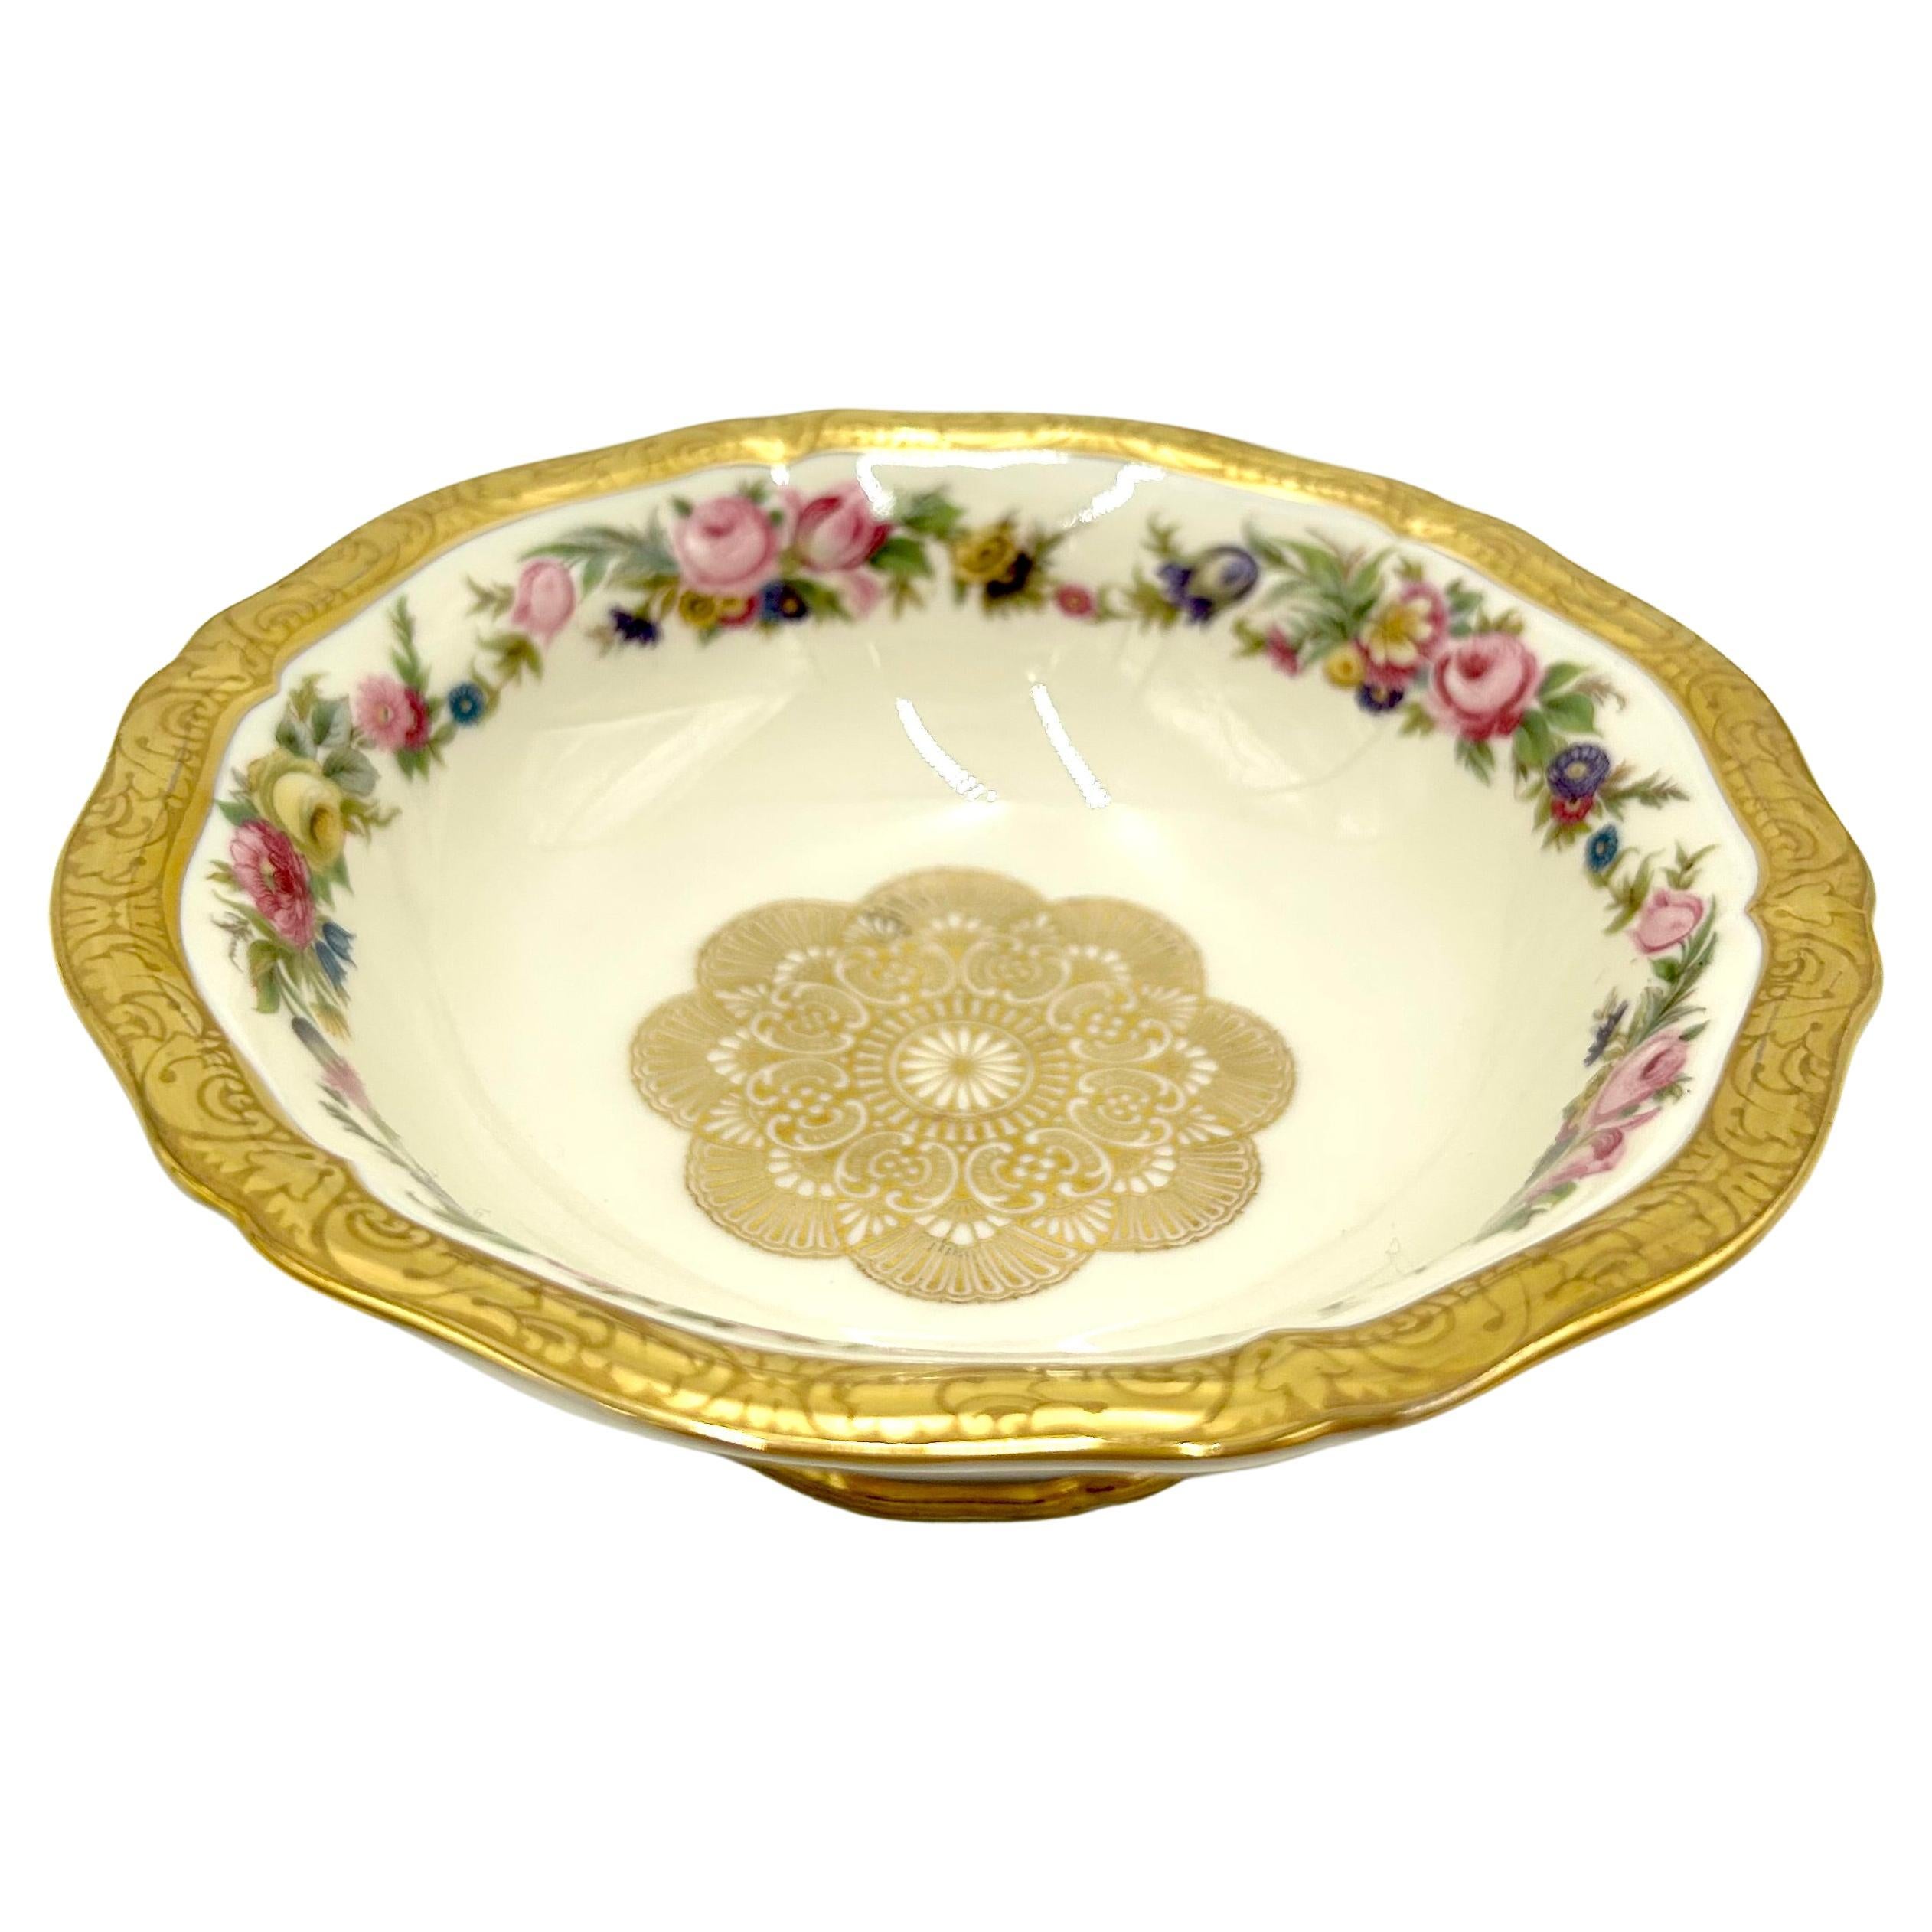 Platter with gilding, Rosenthal Chippendale, Germany, 1948